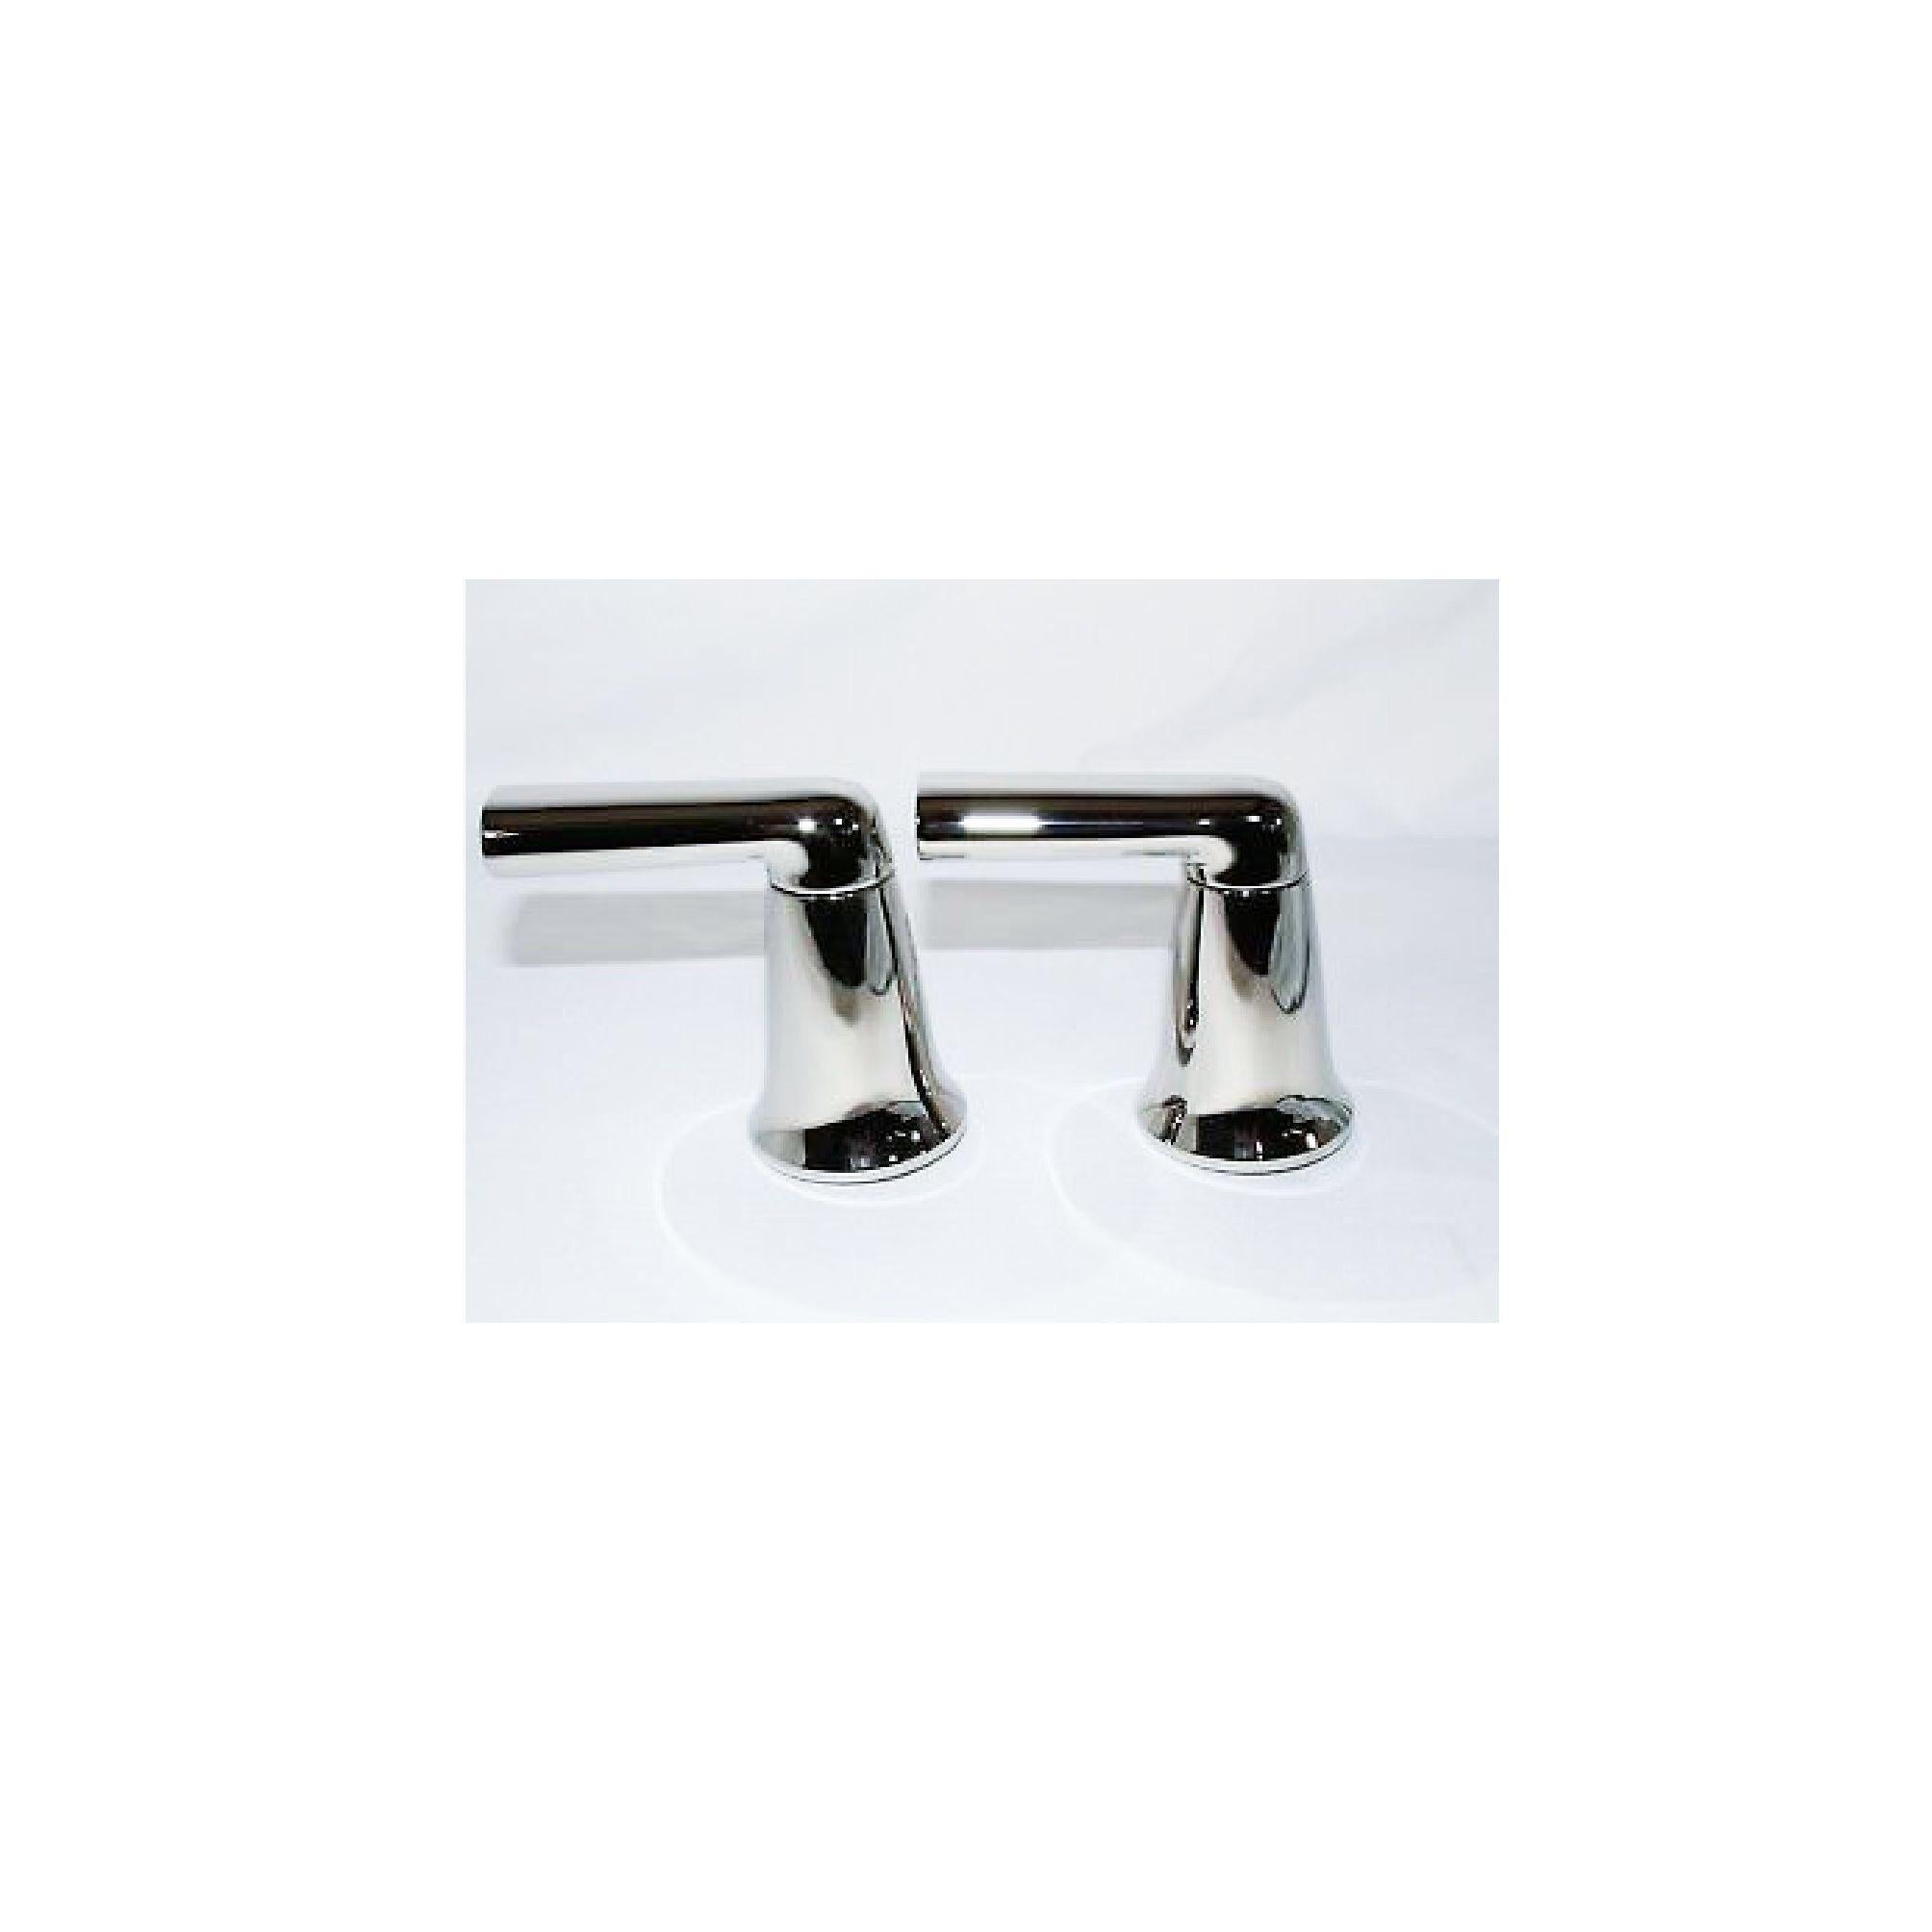 American Barbara Berry for Kallista ‘Counterpoint’ Chrome Deco Faucet & Lever Handles